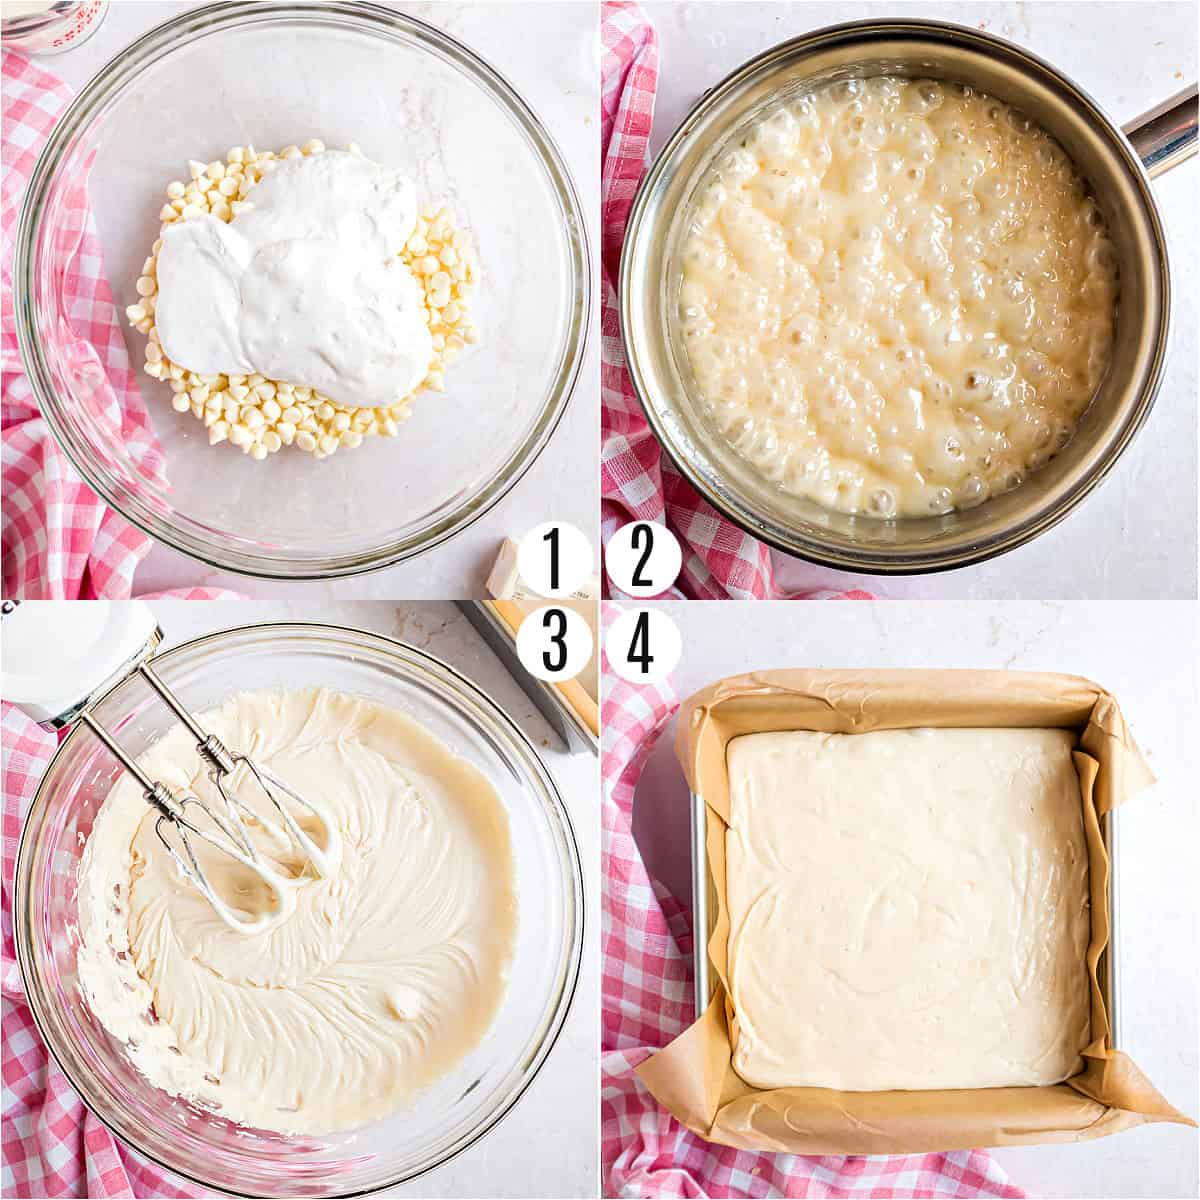 Step by step photos showing how to make vanilla fudge.